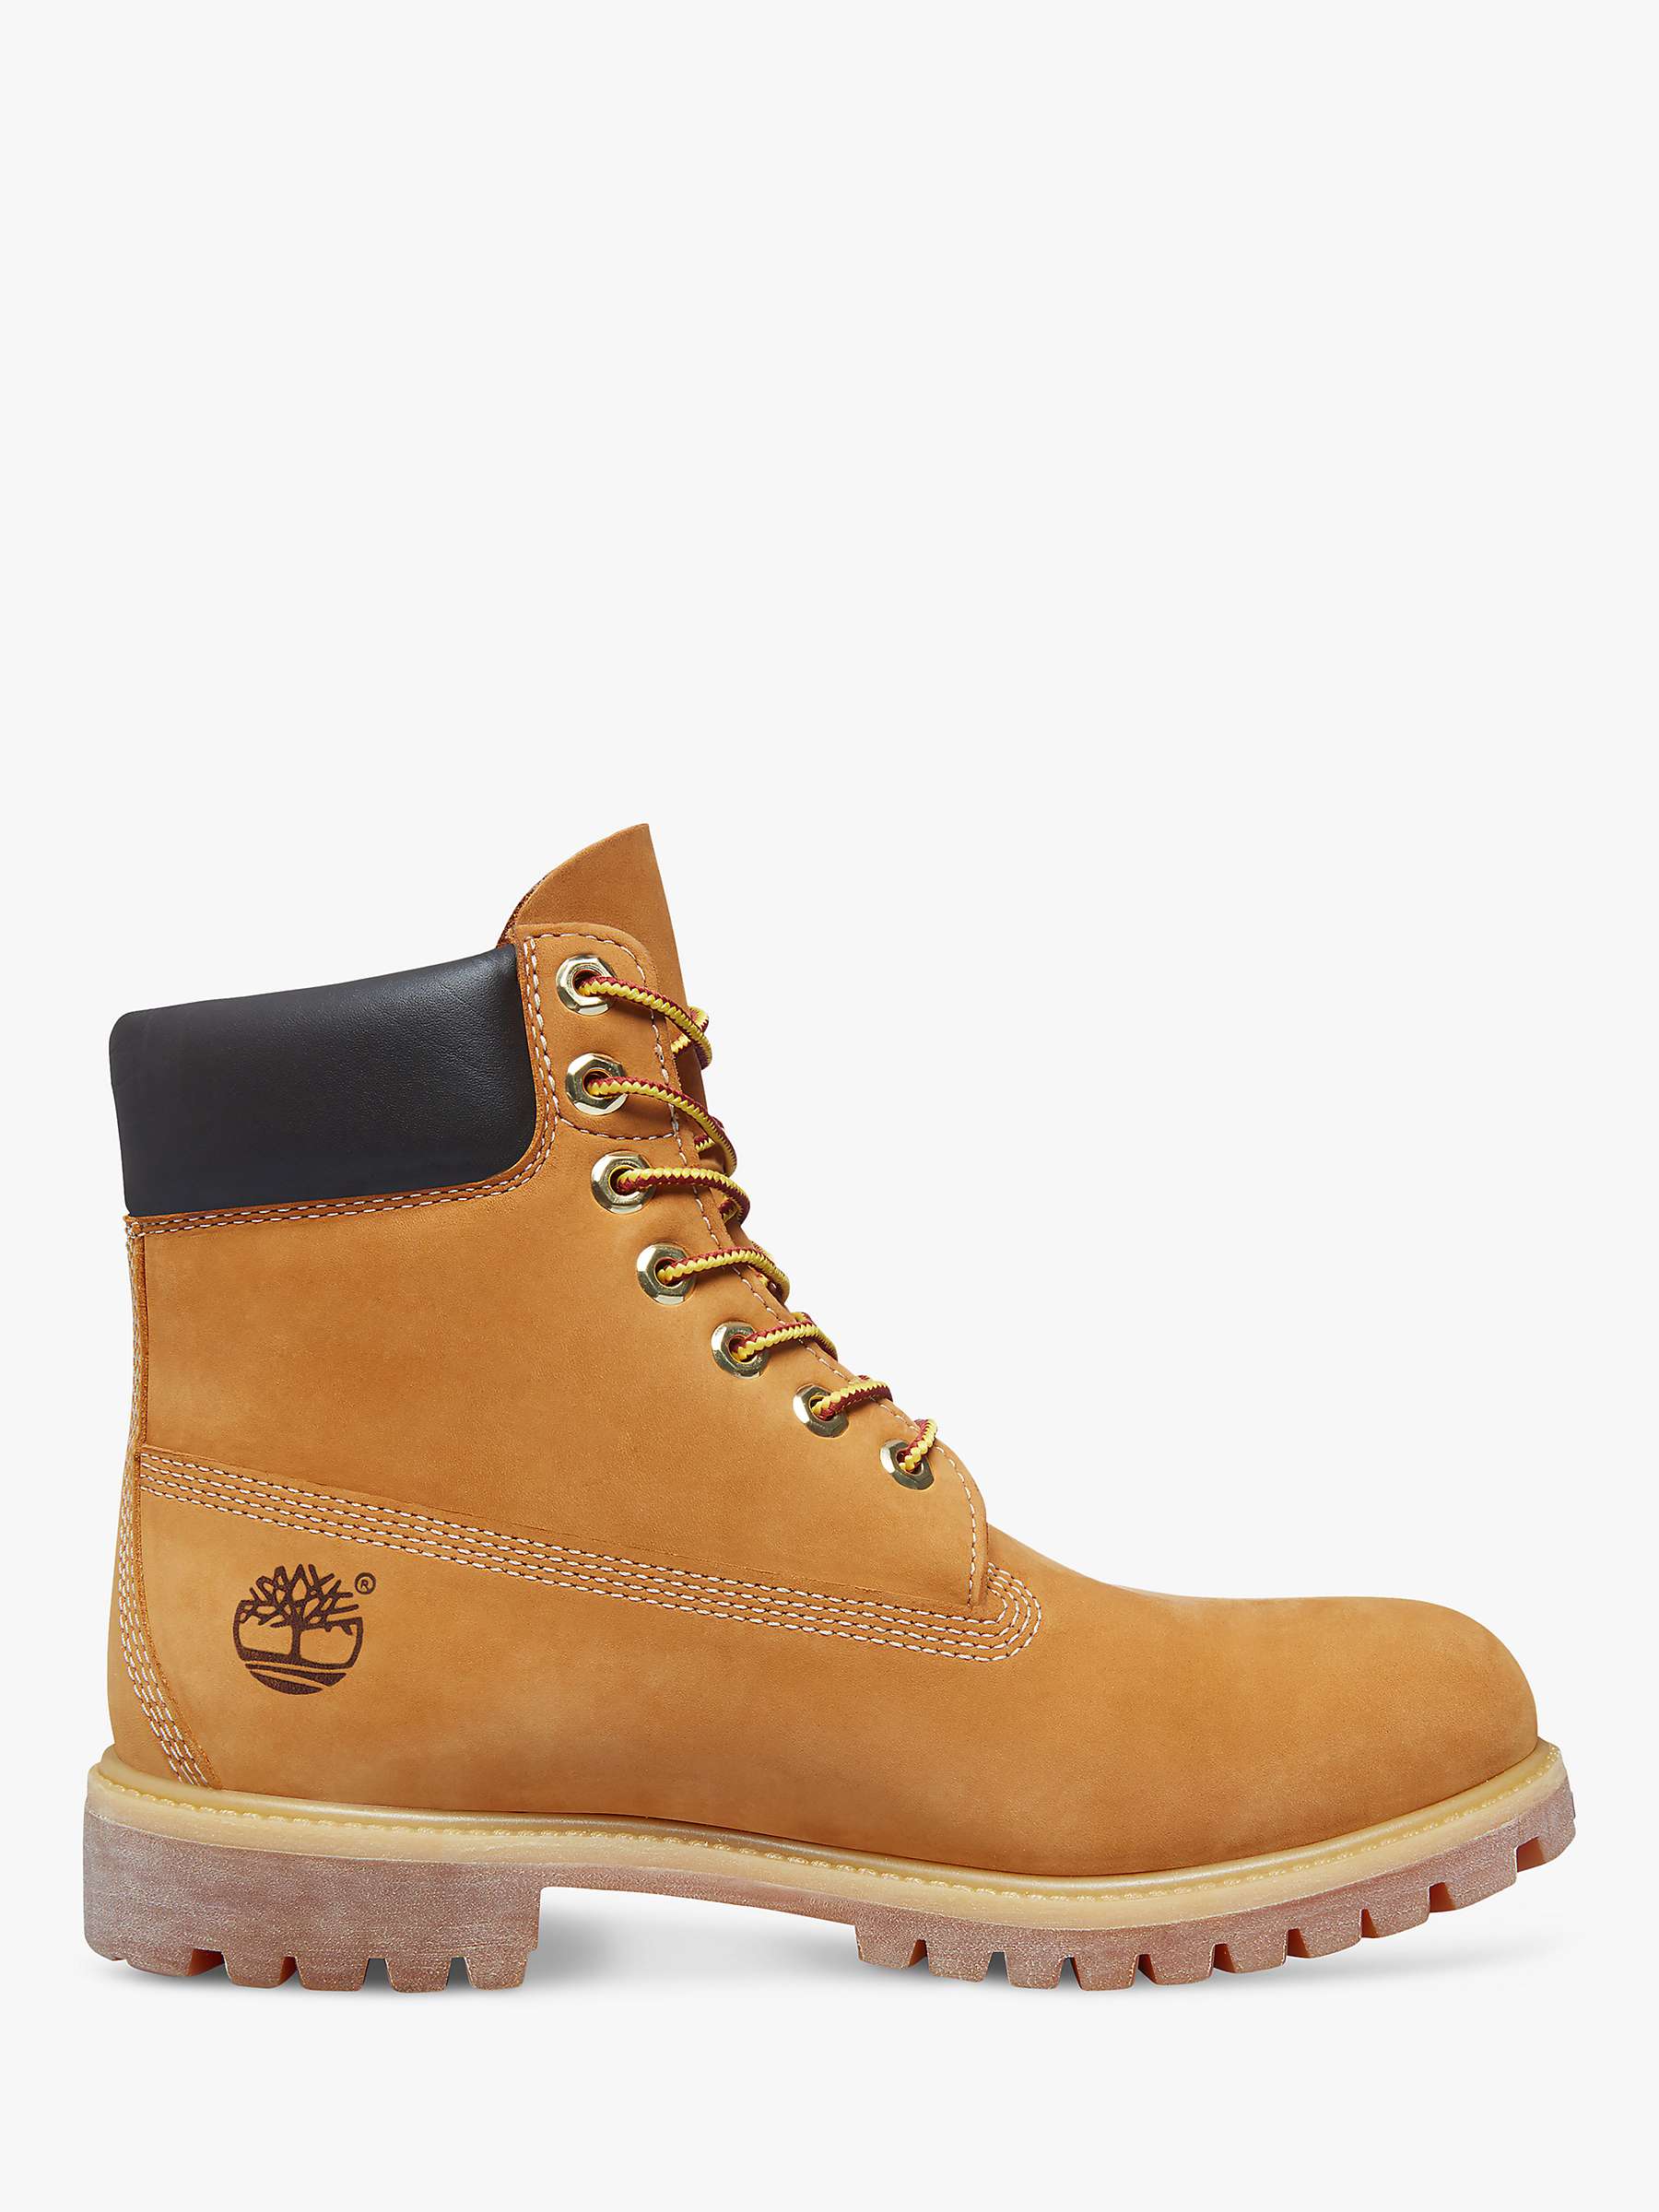 How To Spot Original Timberland Boots | peacecommission.kdsg.gov.ng